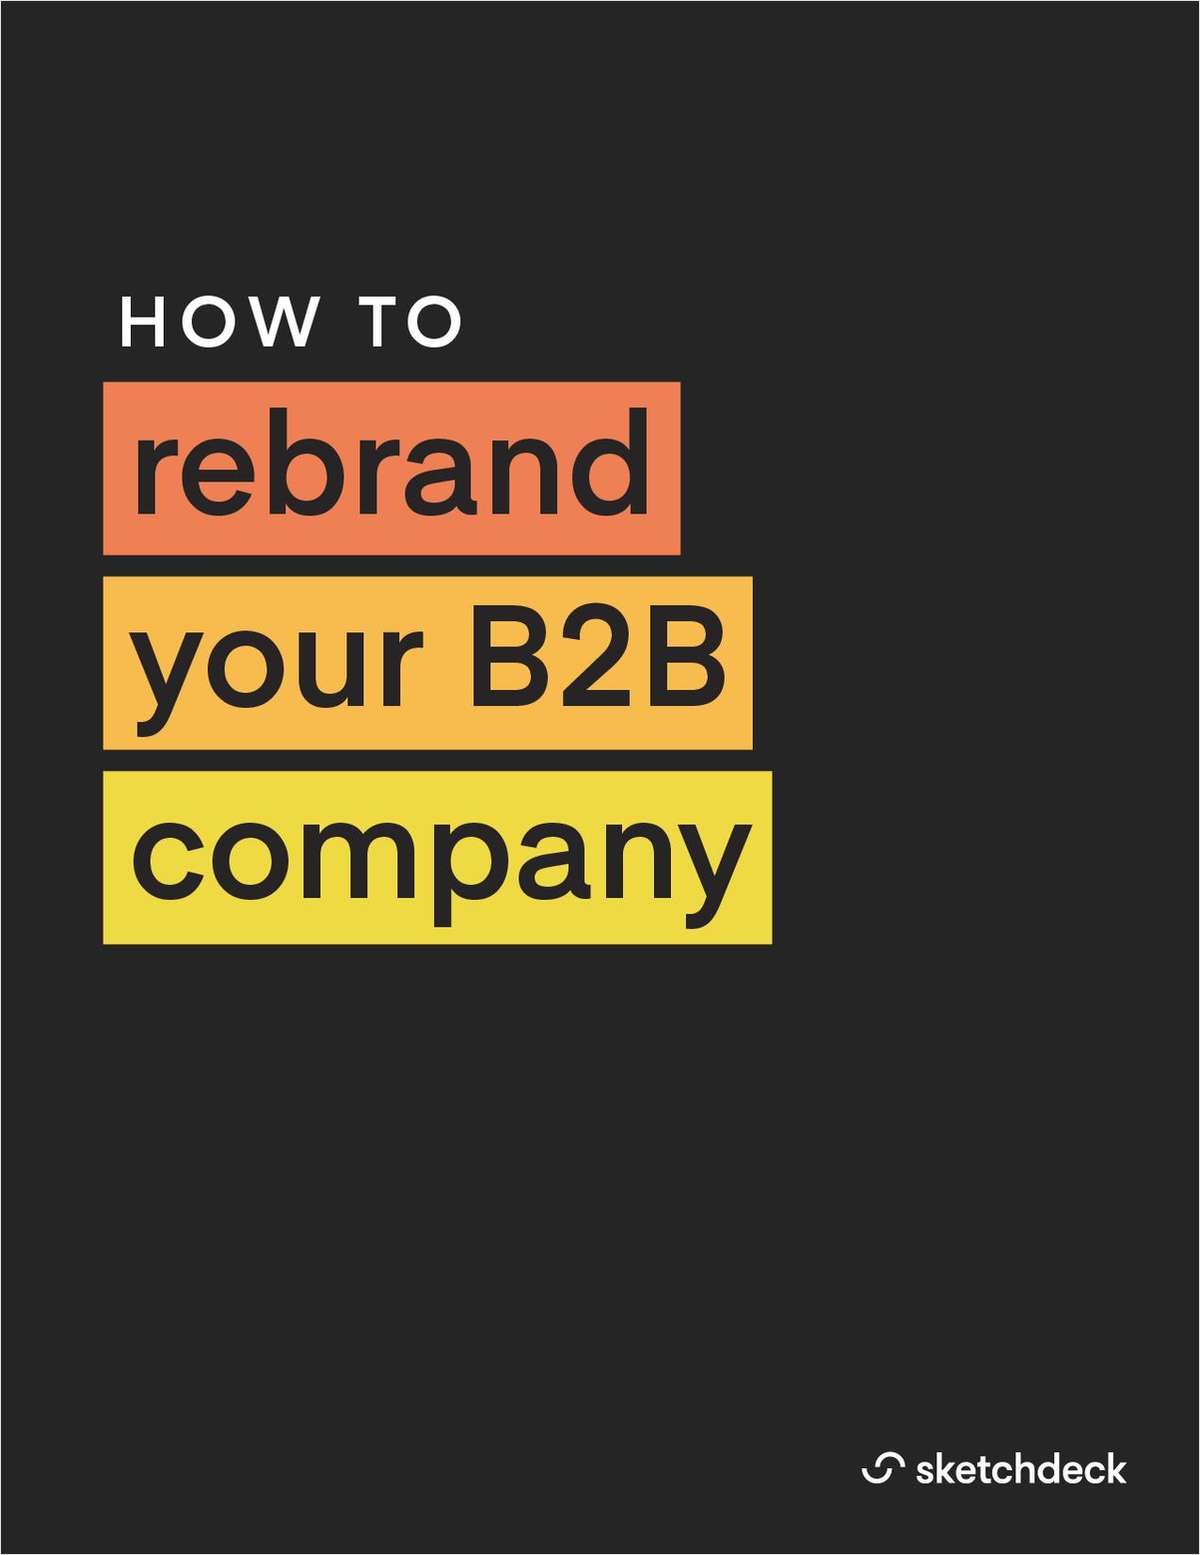 How to Rebrand Your B2B Company